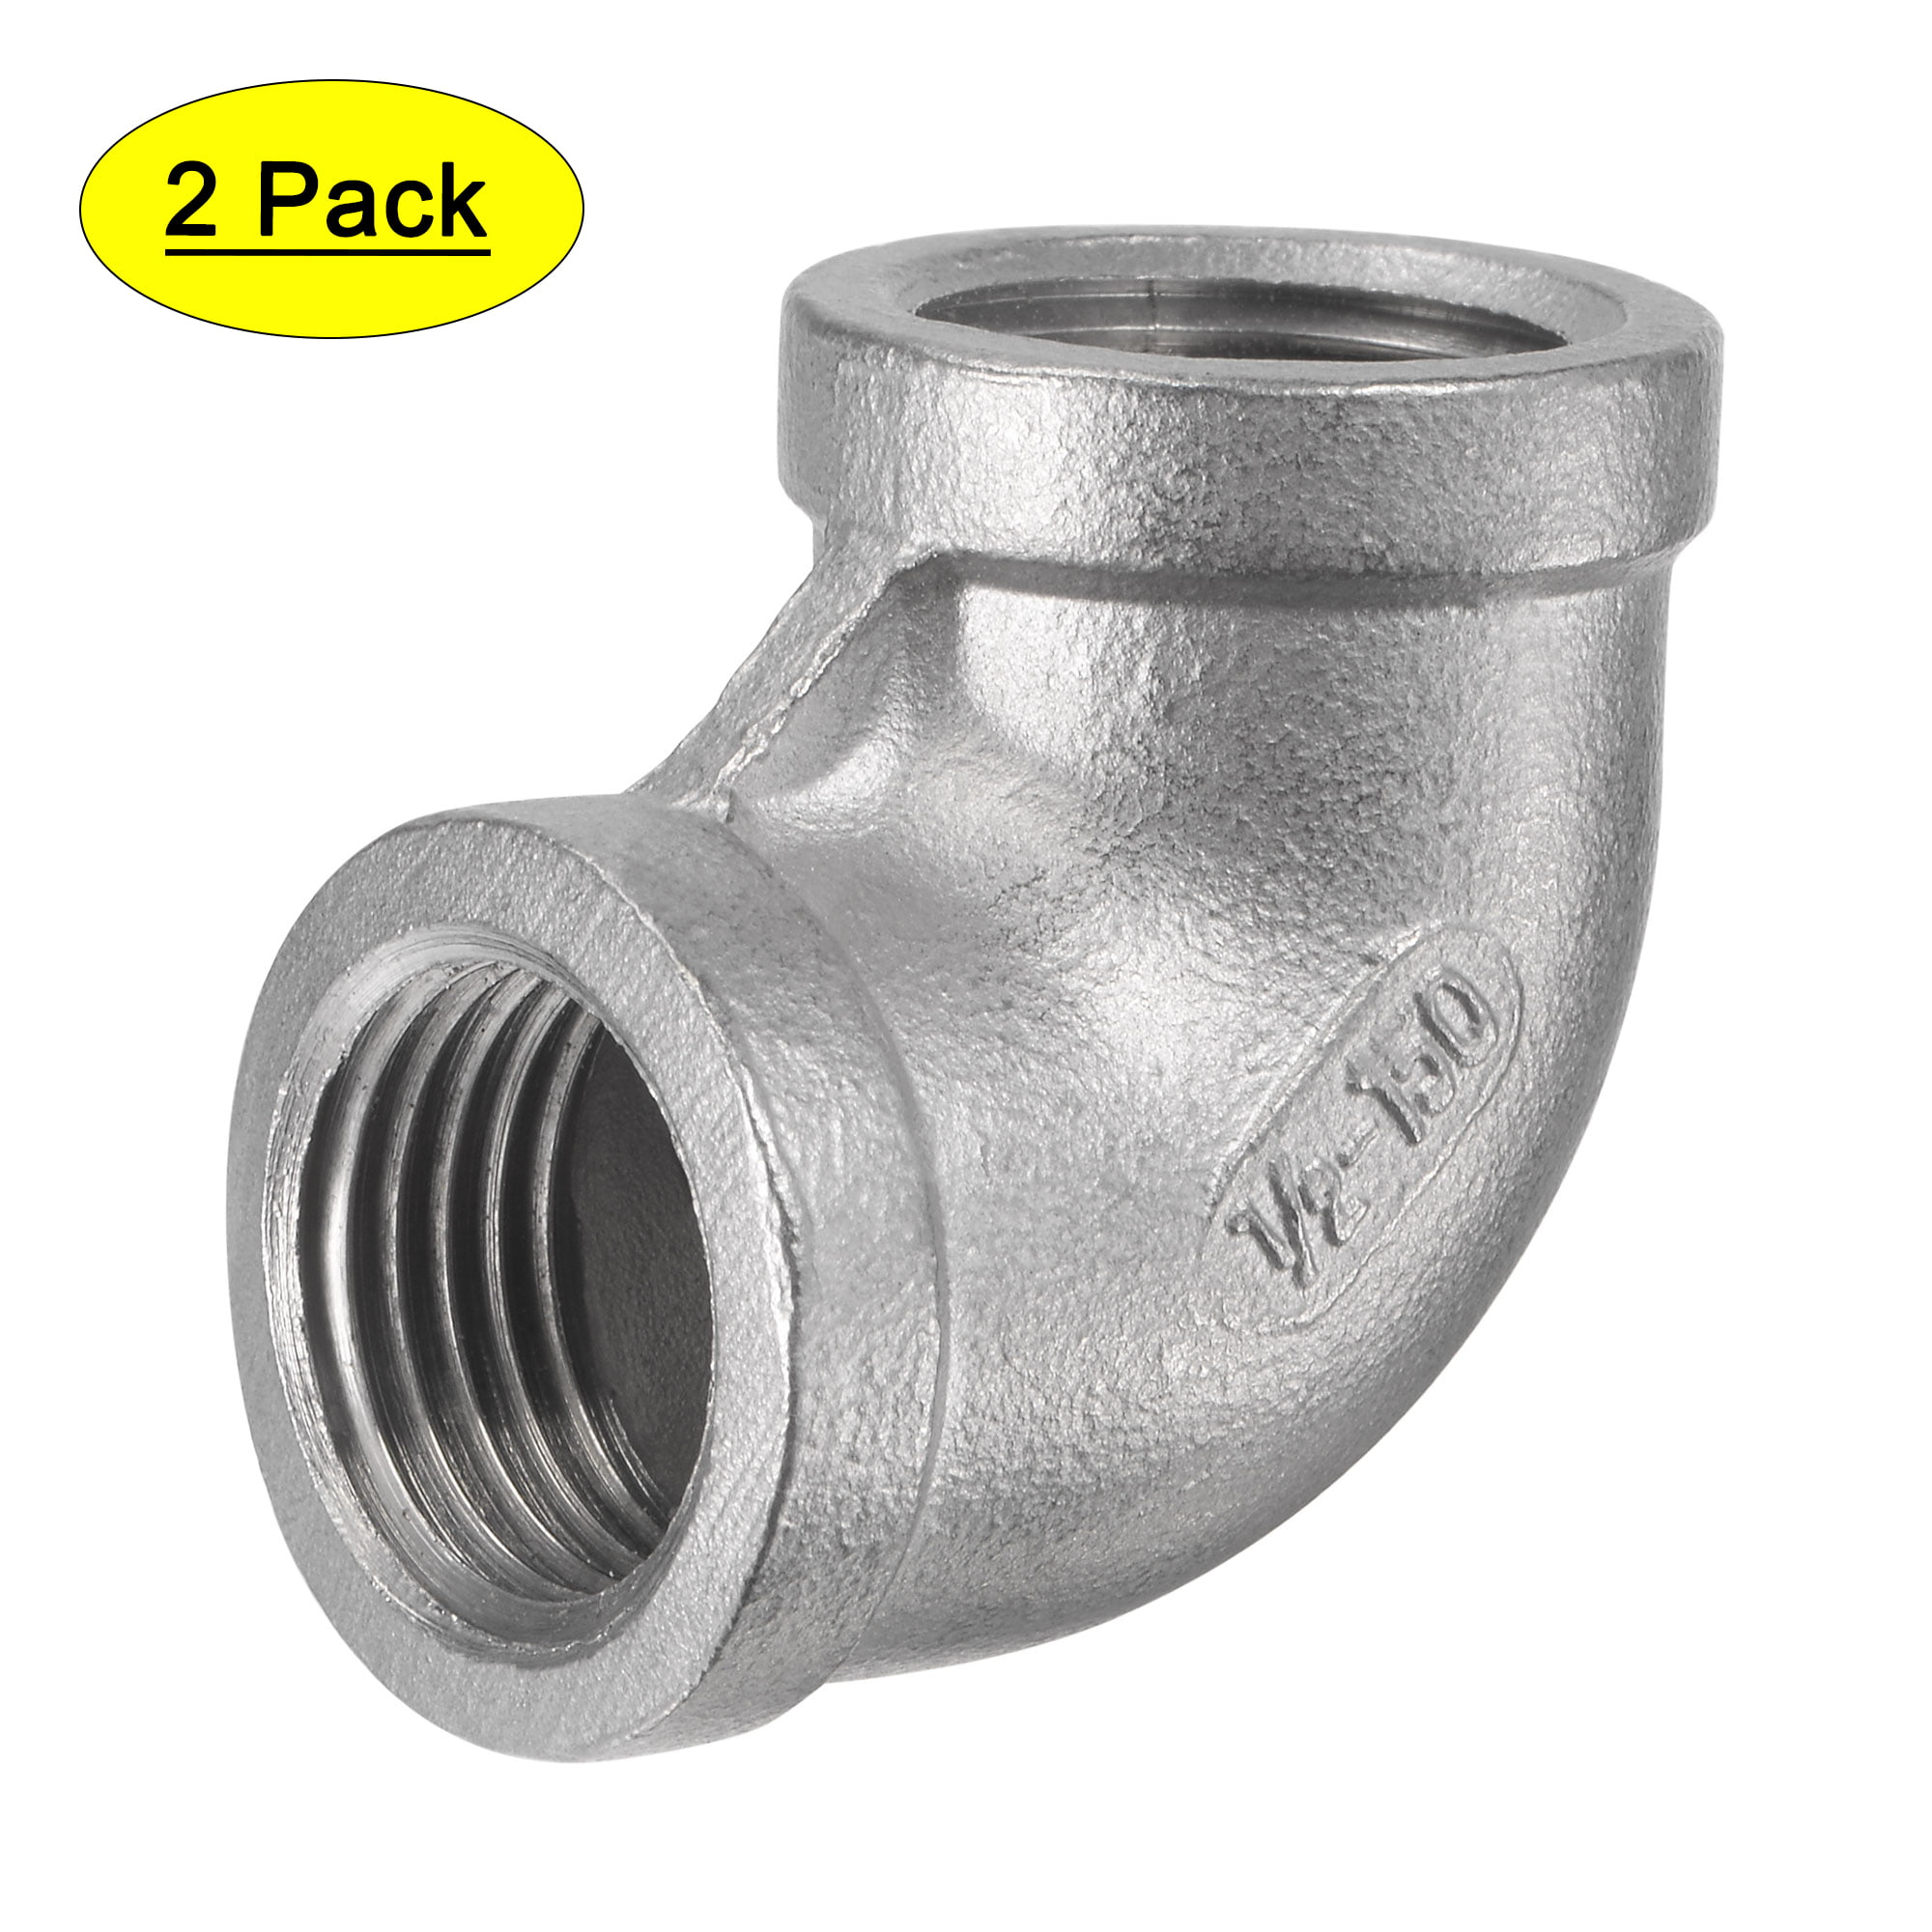 Stainless Steal 150# Pipe Fitting 90 Degree Elbow 304 NPT Threaded 2-Inch 